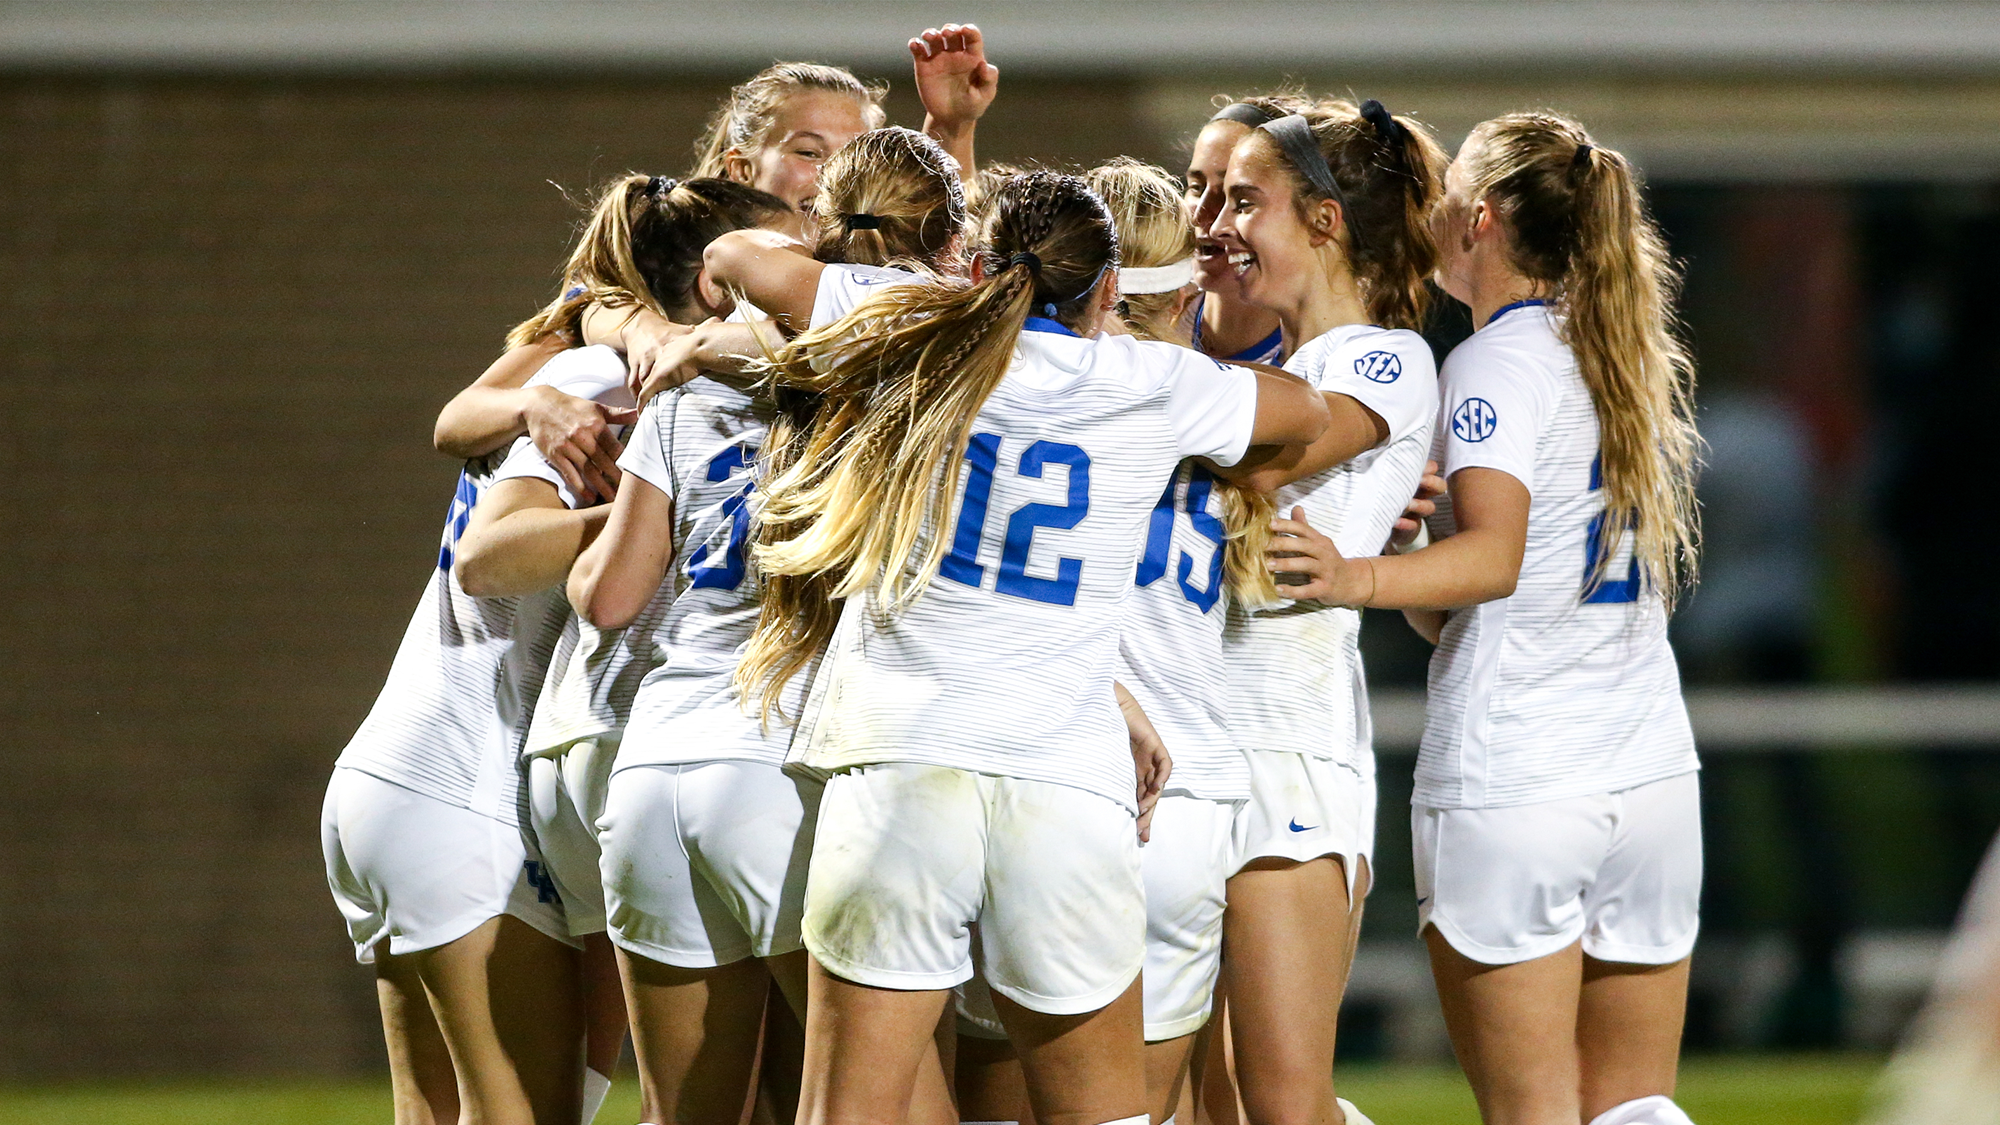 UK Women’s Soccer Adds 11 Newcomers to 2021 Roster